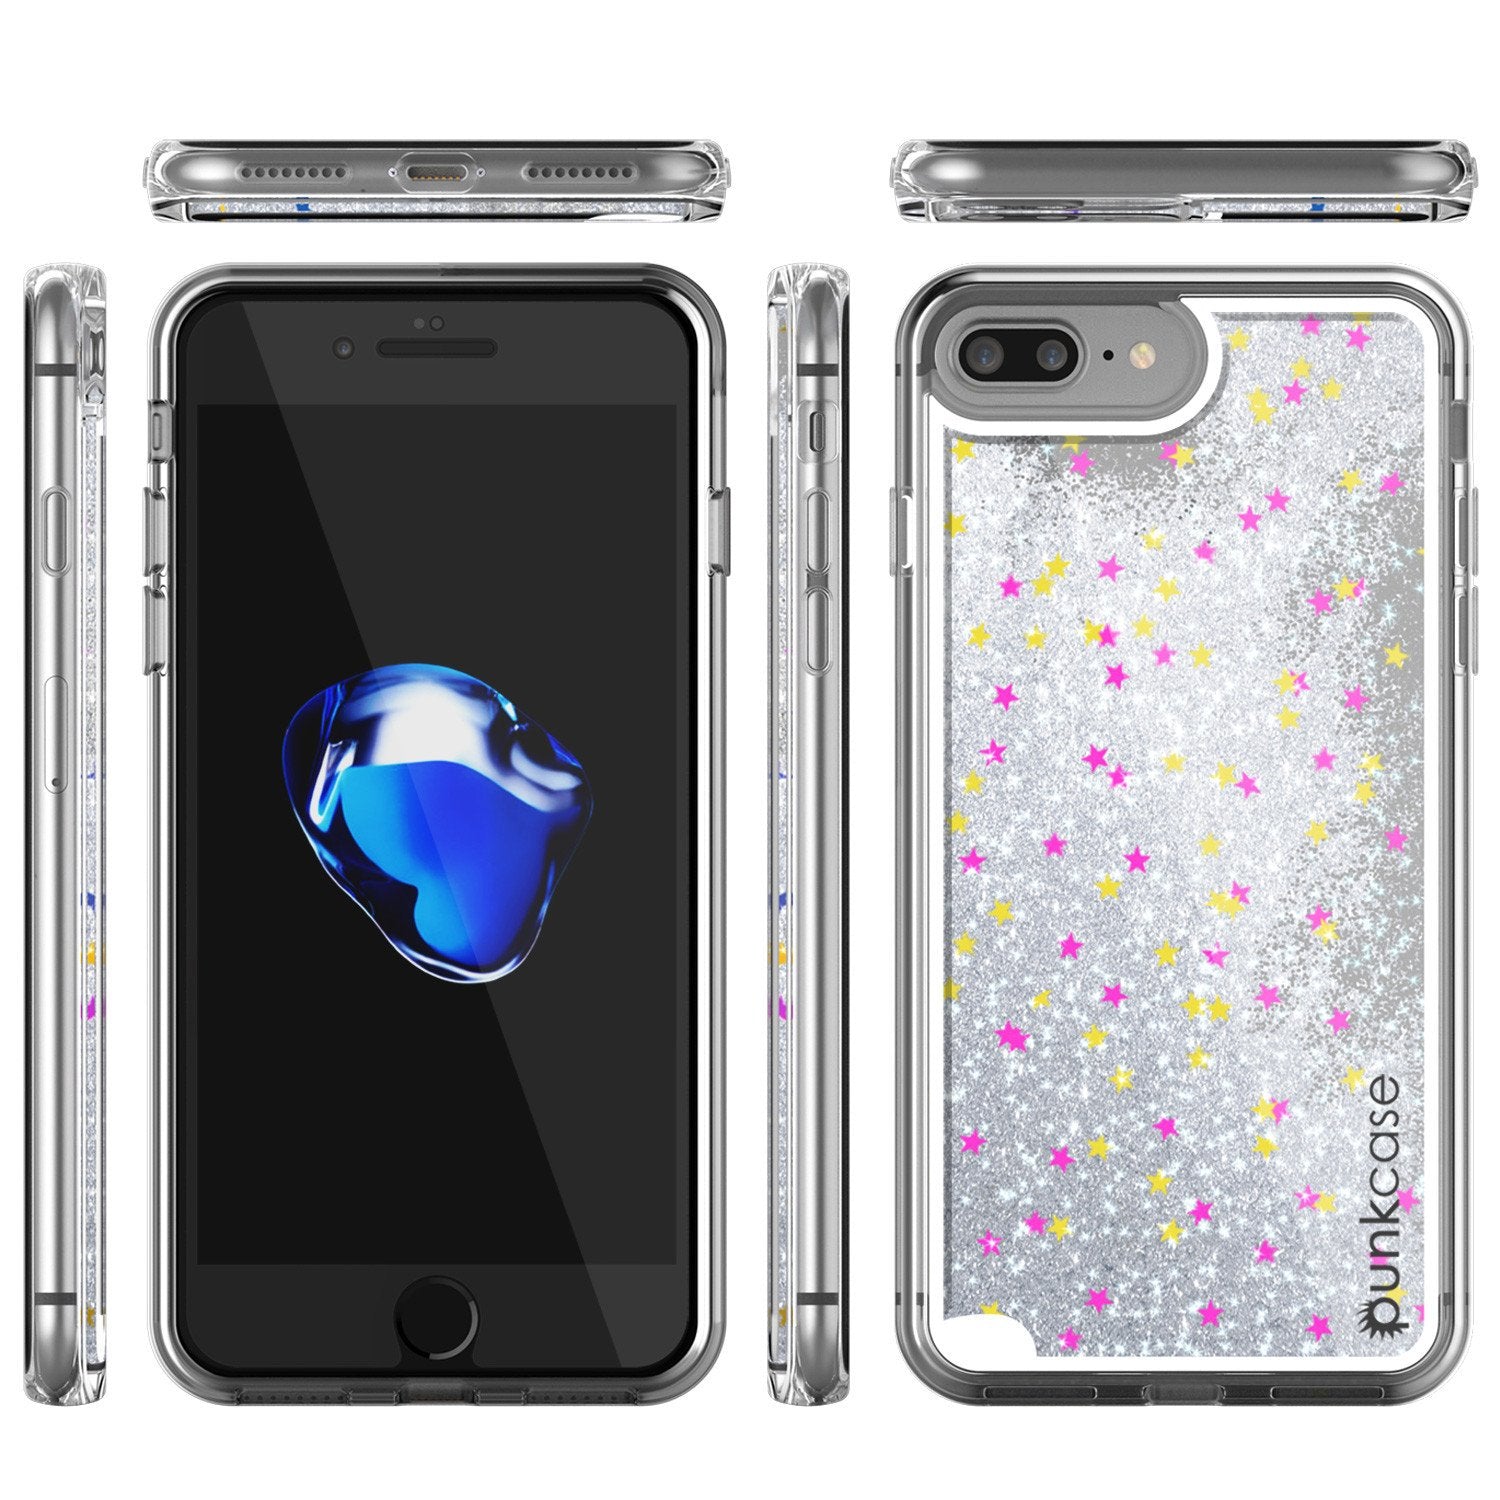 iPhone 7 Plus Case, Punkcase [Liquid Silver Series] Protective Dual Layer Floating Glitter Cover with lots of Bling & Sparkle + 0.3mm Tempered Glass Screen Protector for Apple iPhone 7s Plus